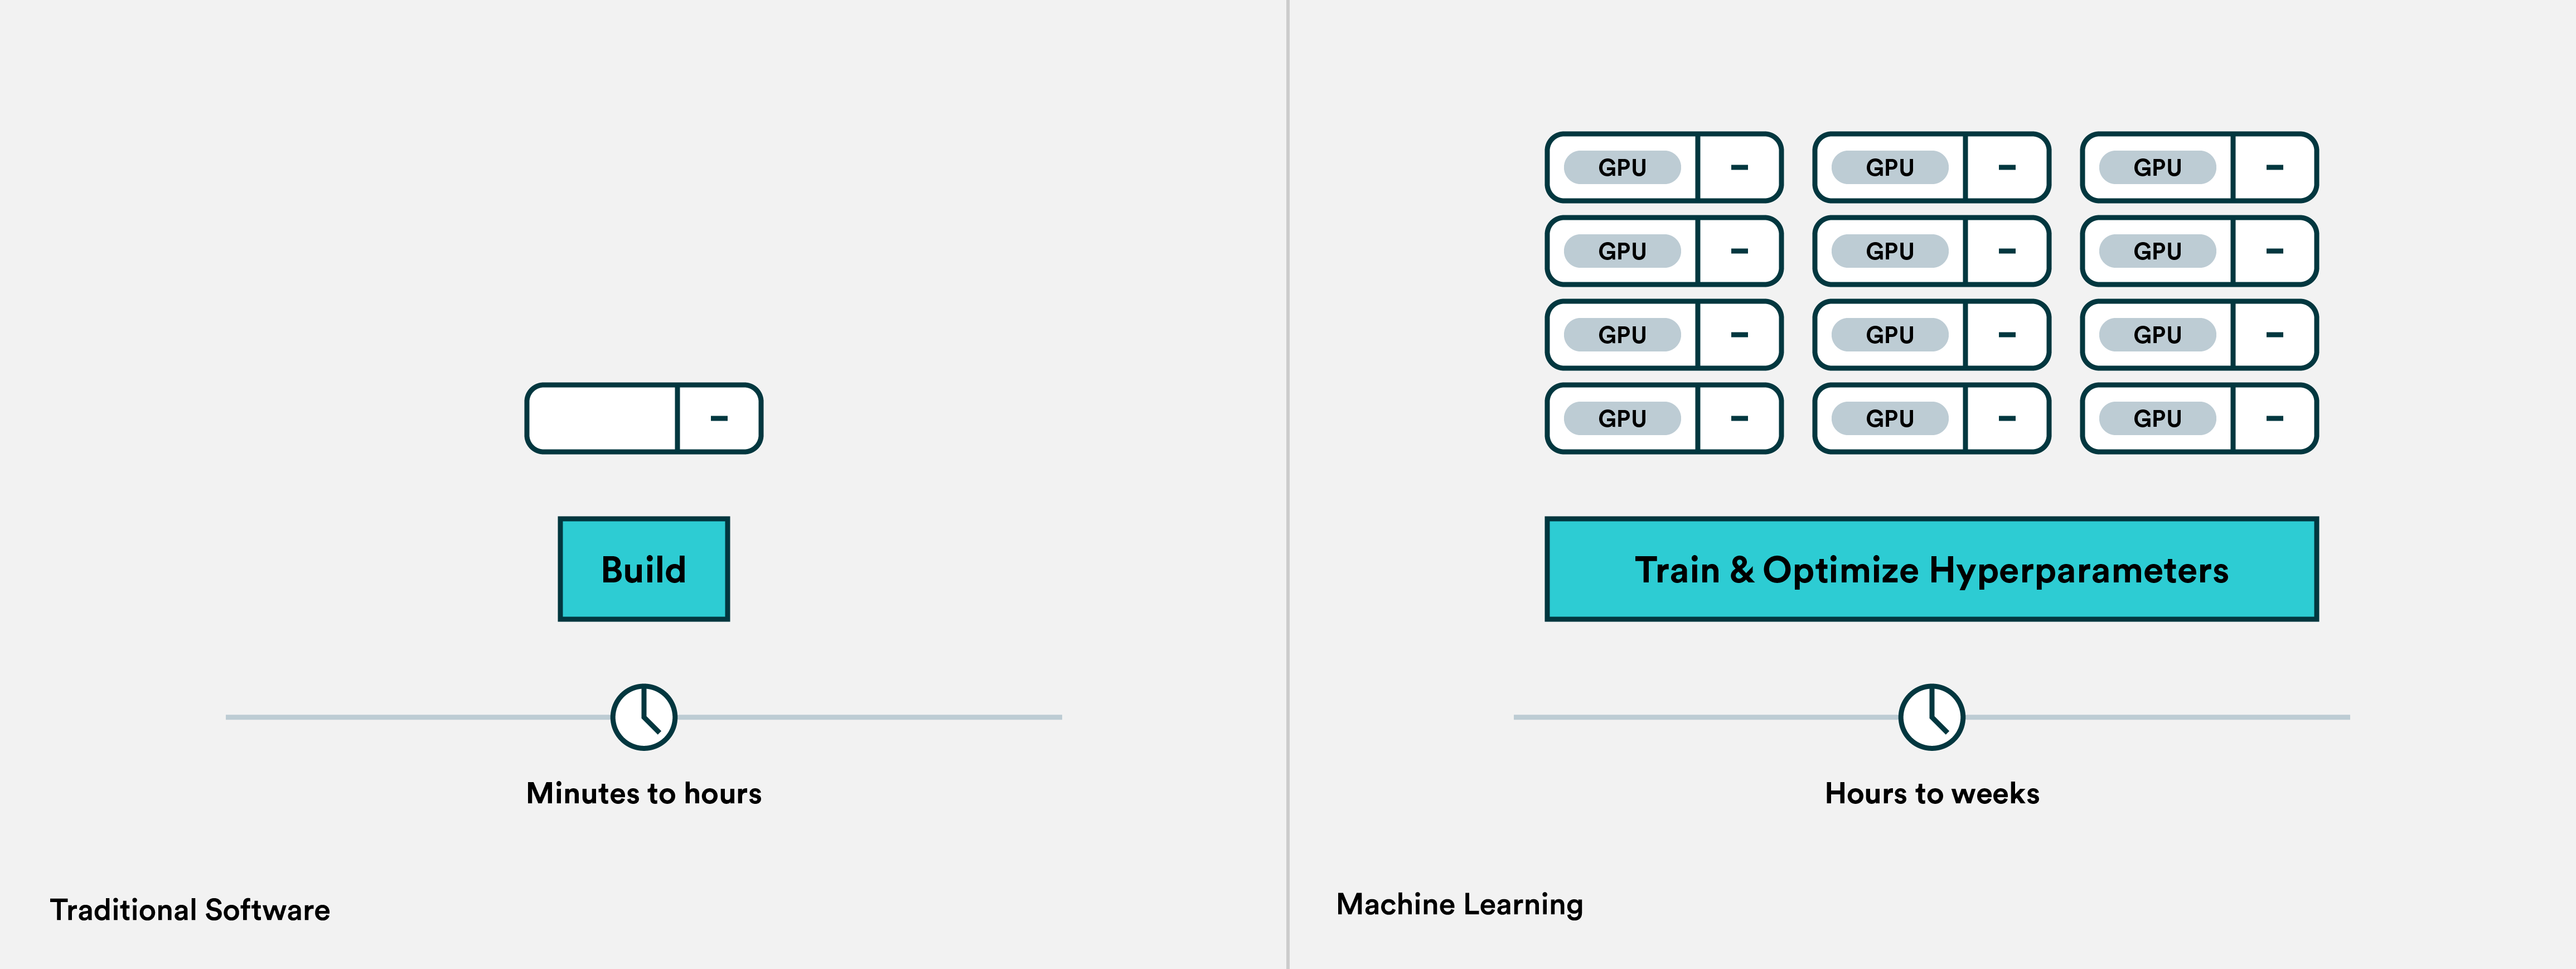 How software and machine learning pipelines are different?